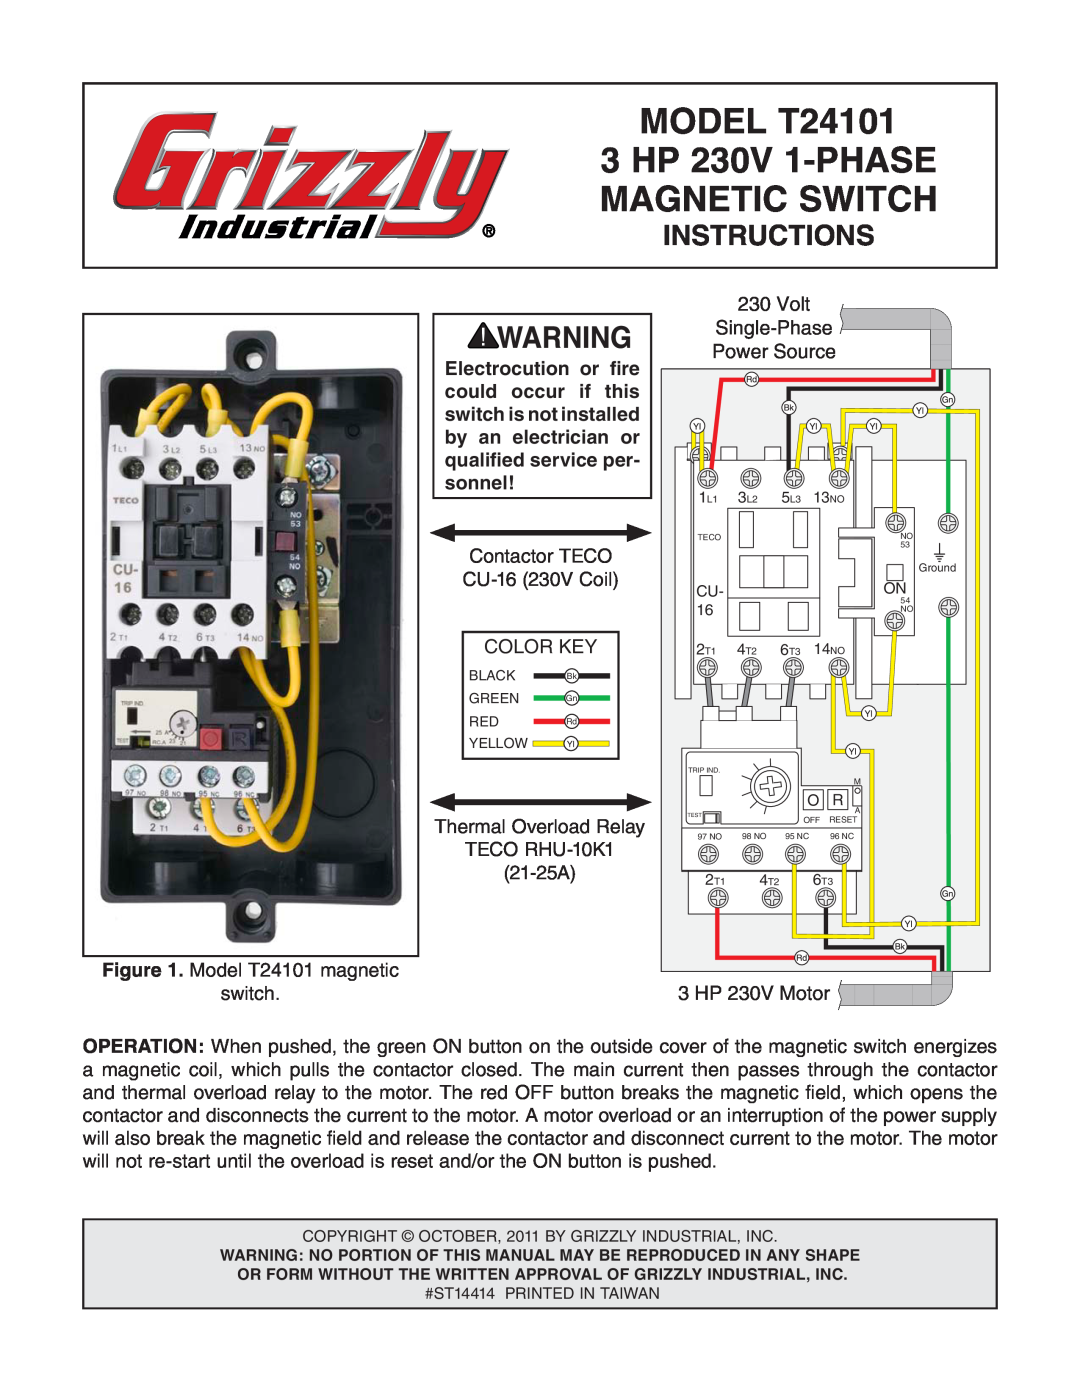 Grizzly manual MODEL T24101, 3 HP 230V 1-PHASE, Magnetic Switch, Instructions 